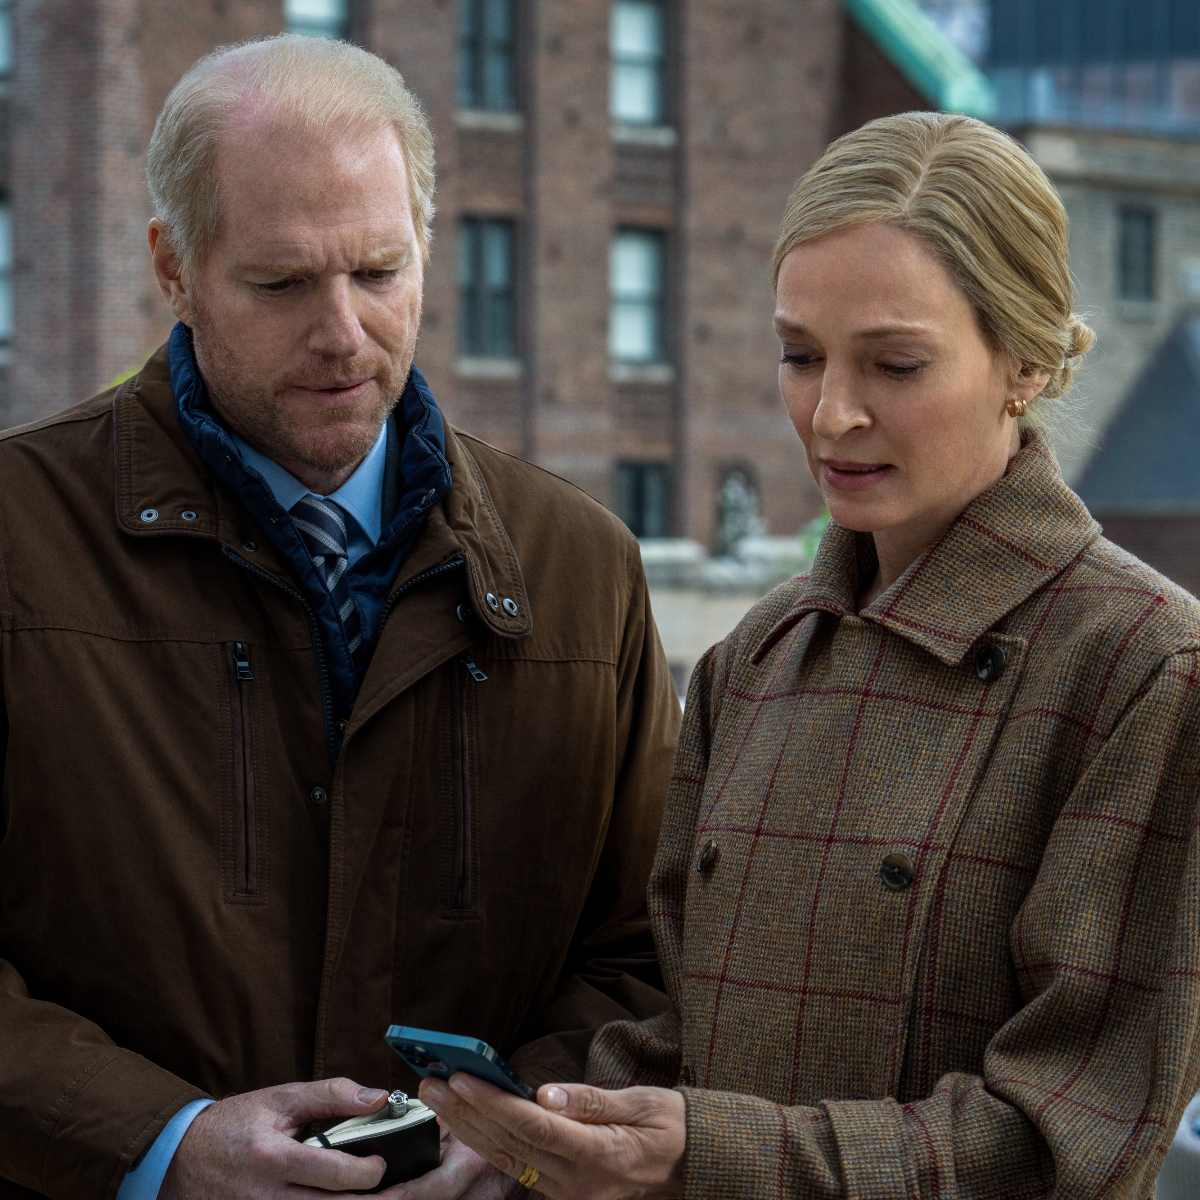 EXCLUSIVE: Noah Emmerich on working with Suspicion co-star Uma Thurman: It's like having a great dance partner